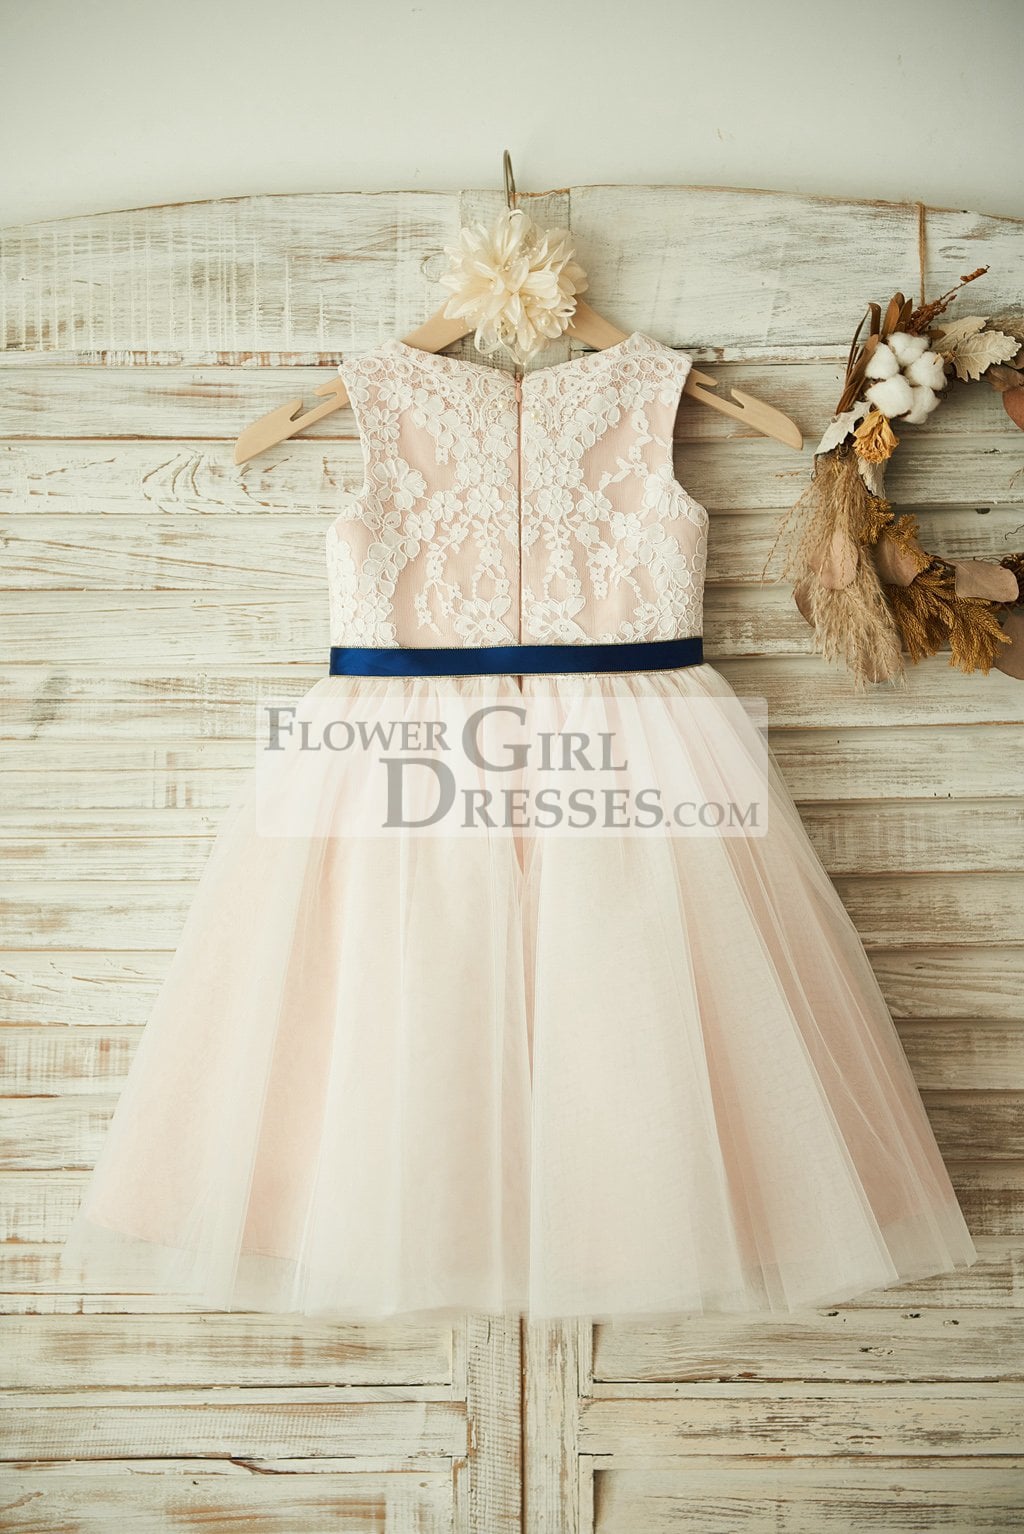 Ivory Lace Tulle Pink Lining Wedding Flower Girl Dress with Navy Blue Sash